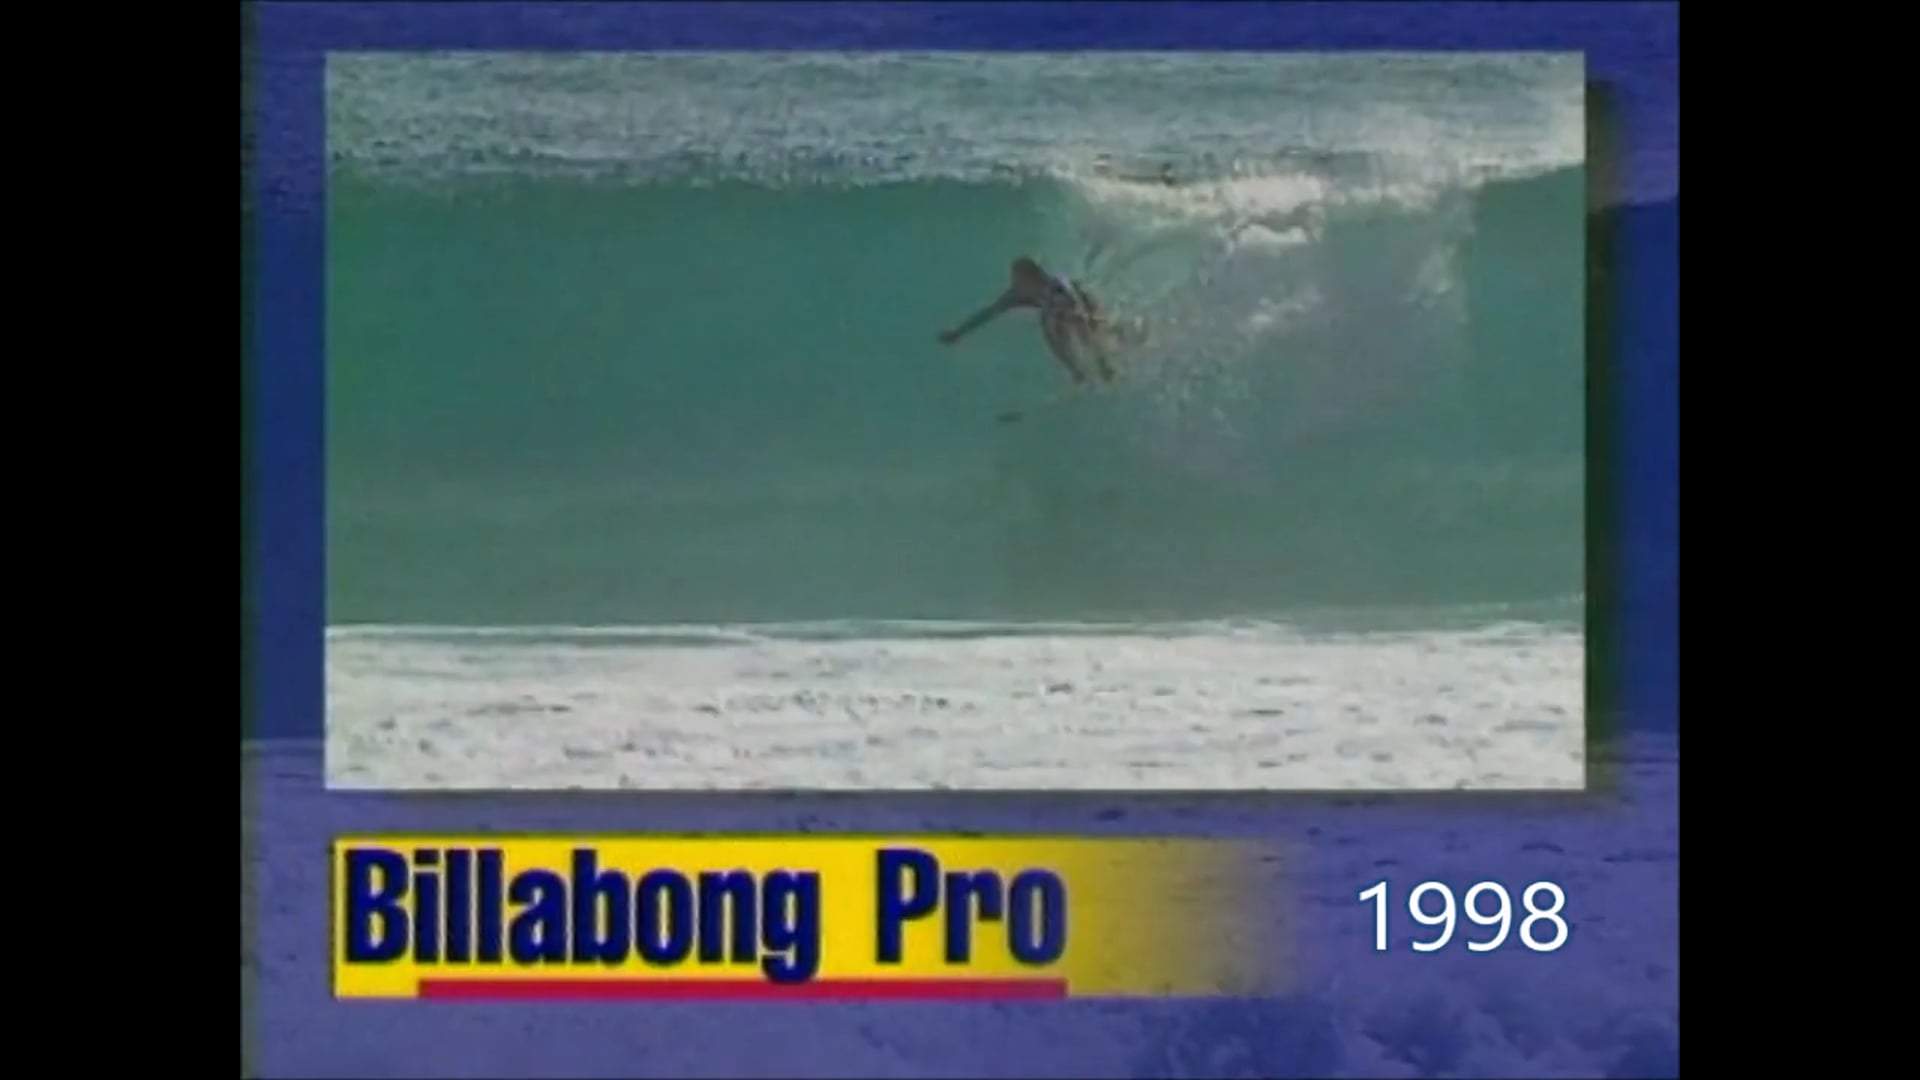 Surfing History: 98 Billabong Pro – March 1998